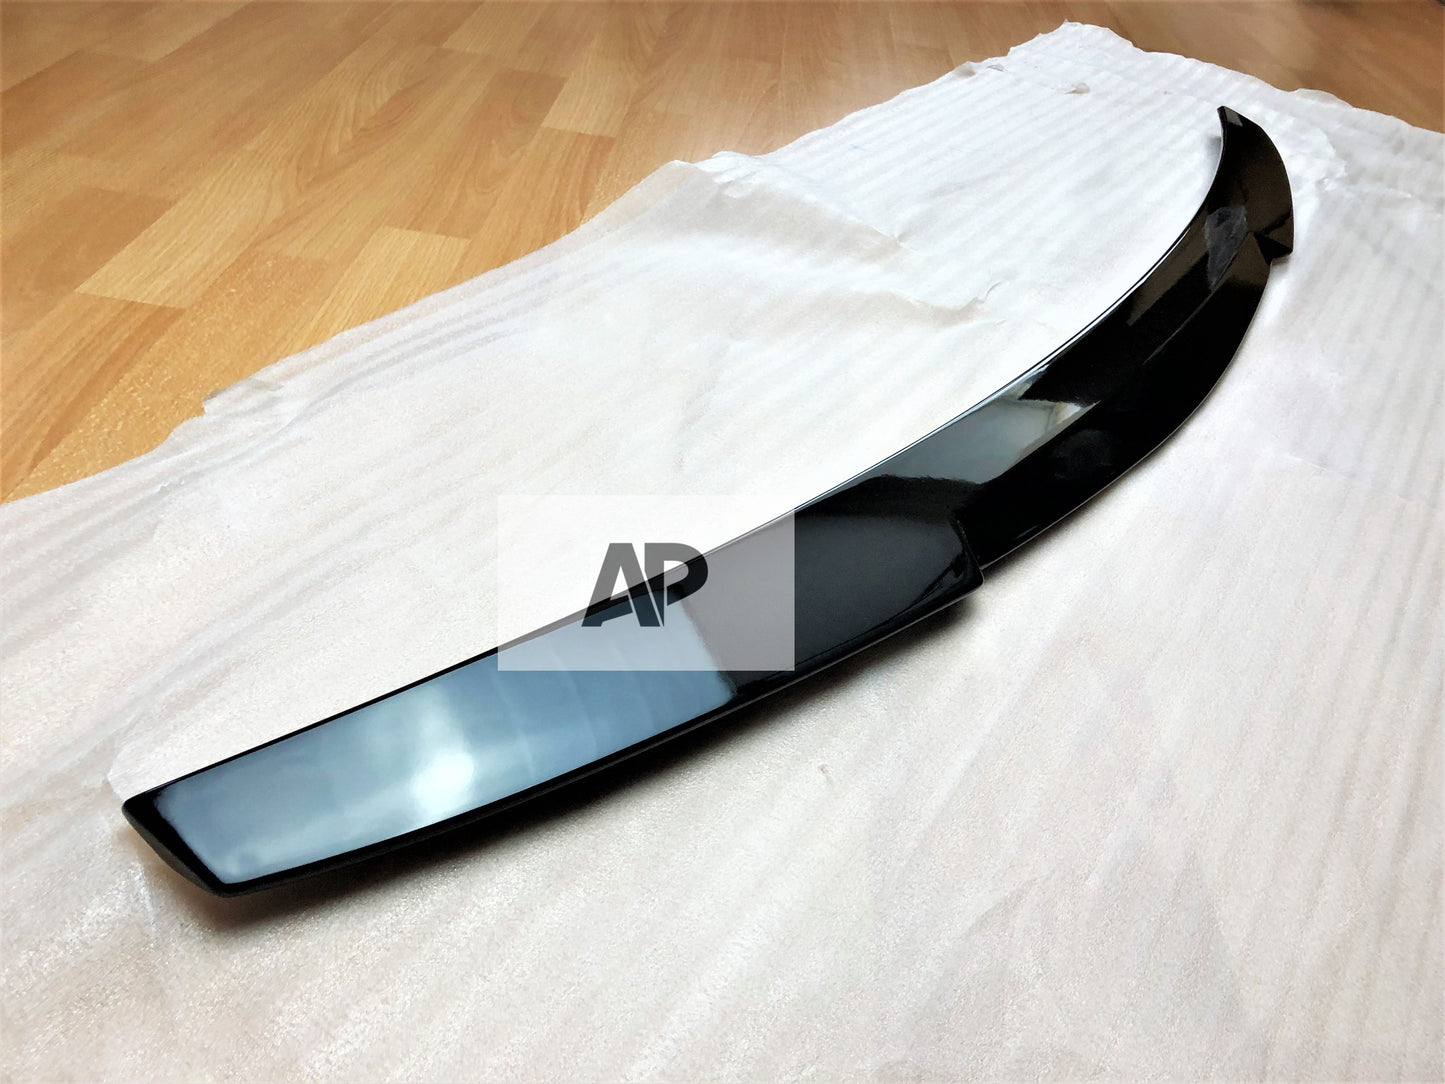 Audi 'RS4 Look' A4 S4 RS4 B8 Gloss Black M4 Style Boot Lip Spoiler 2008-2012